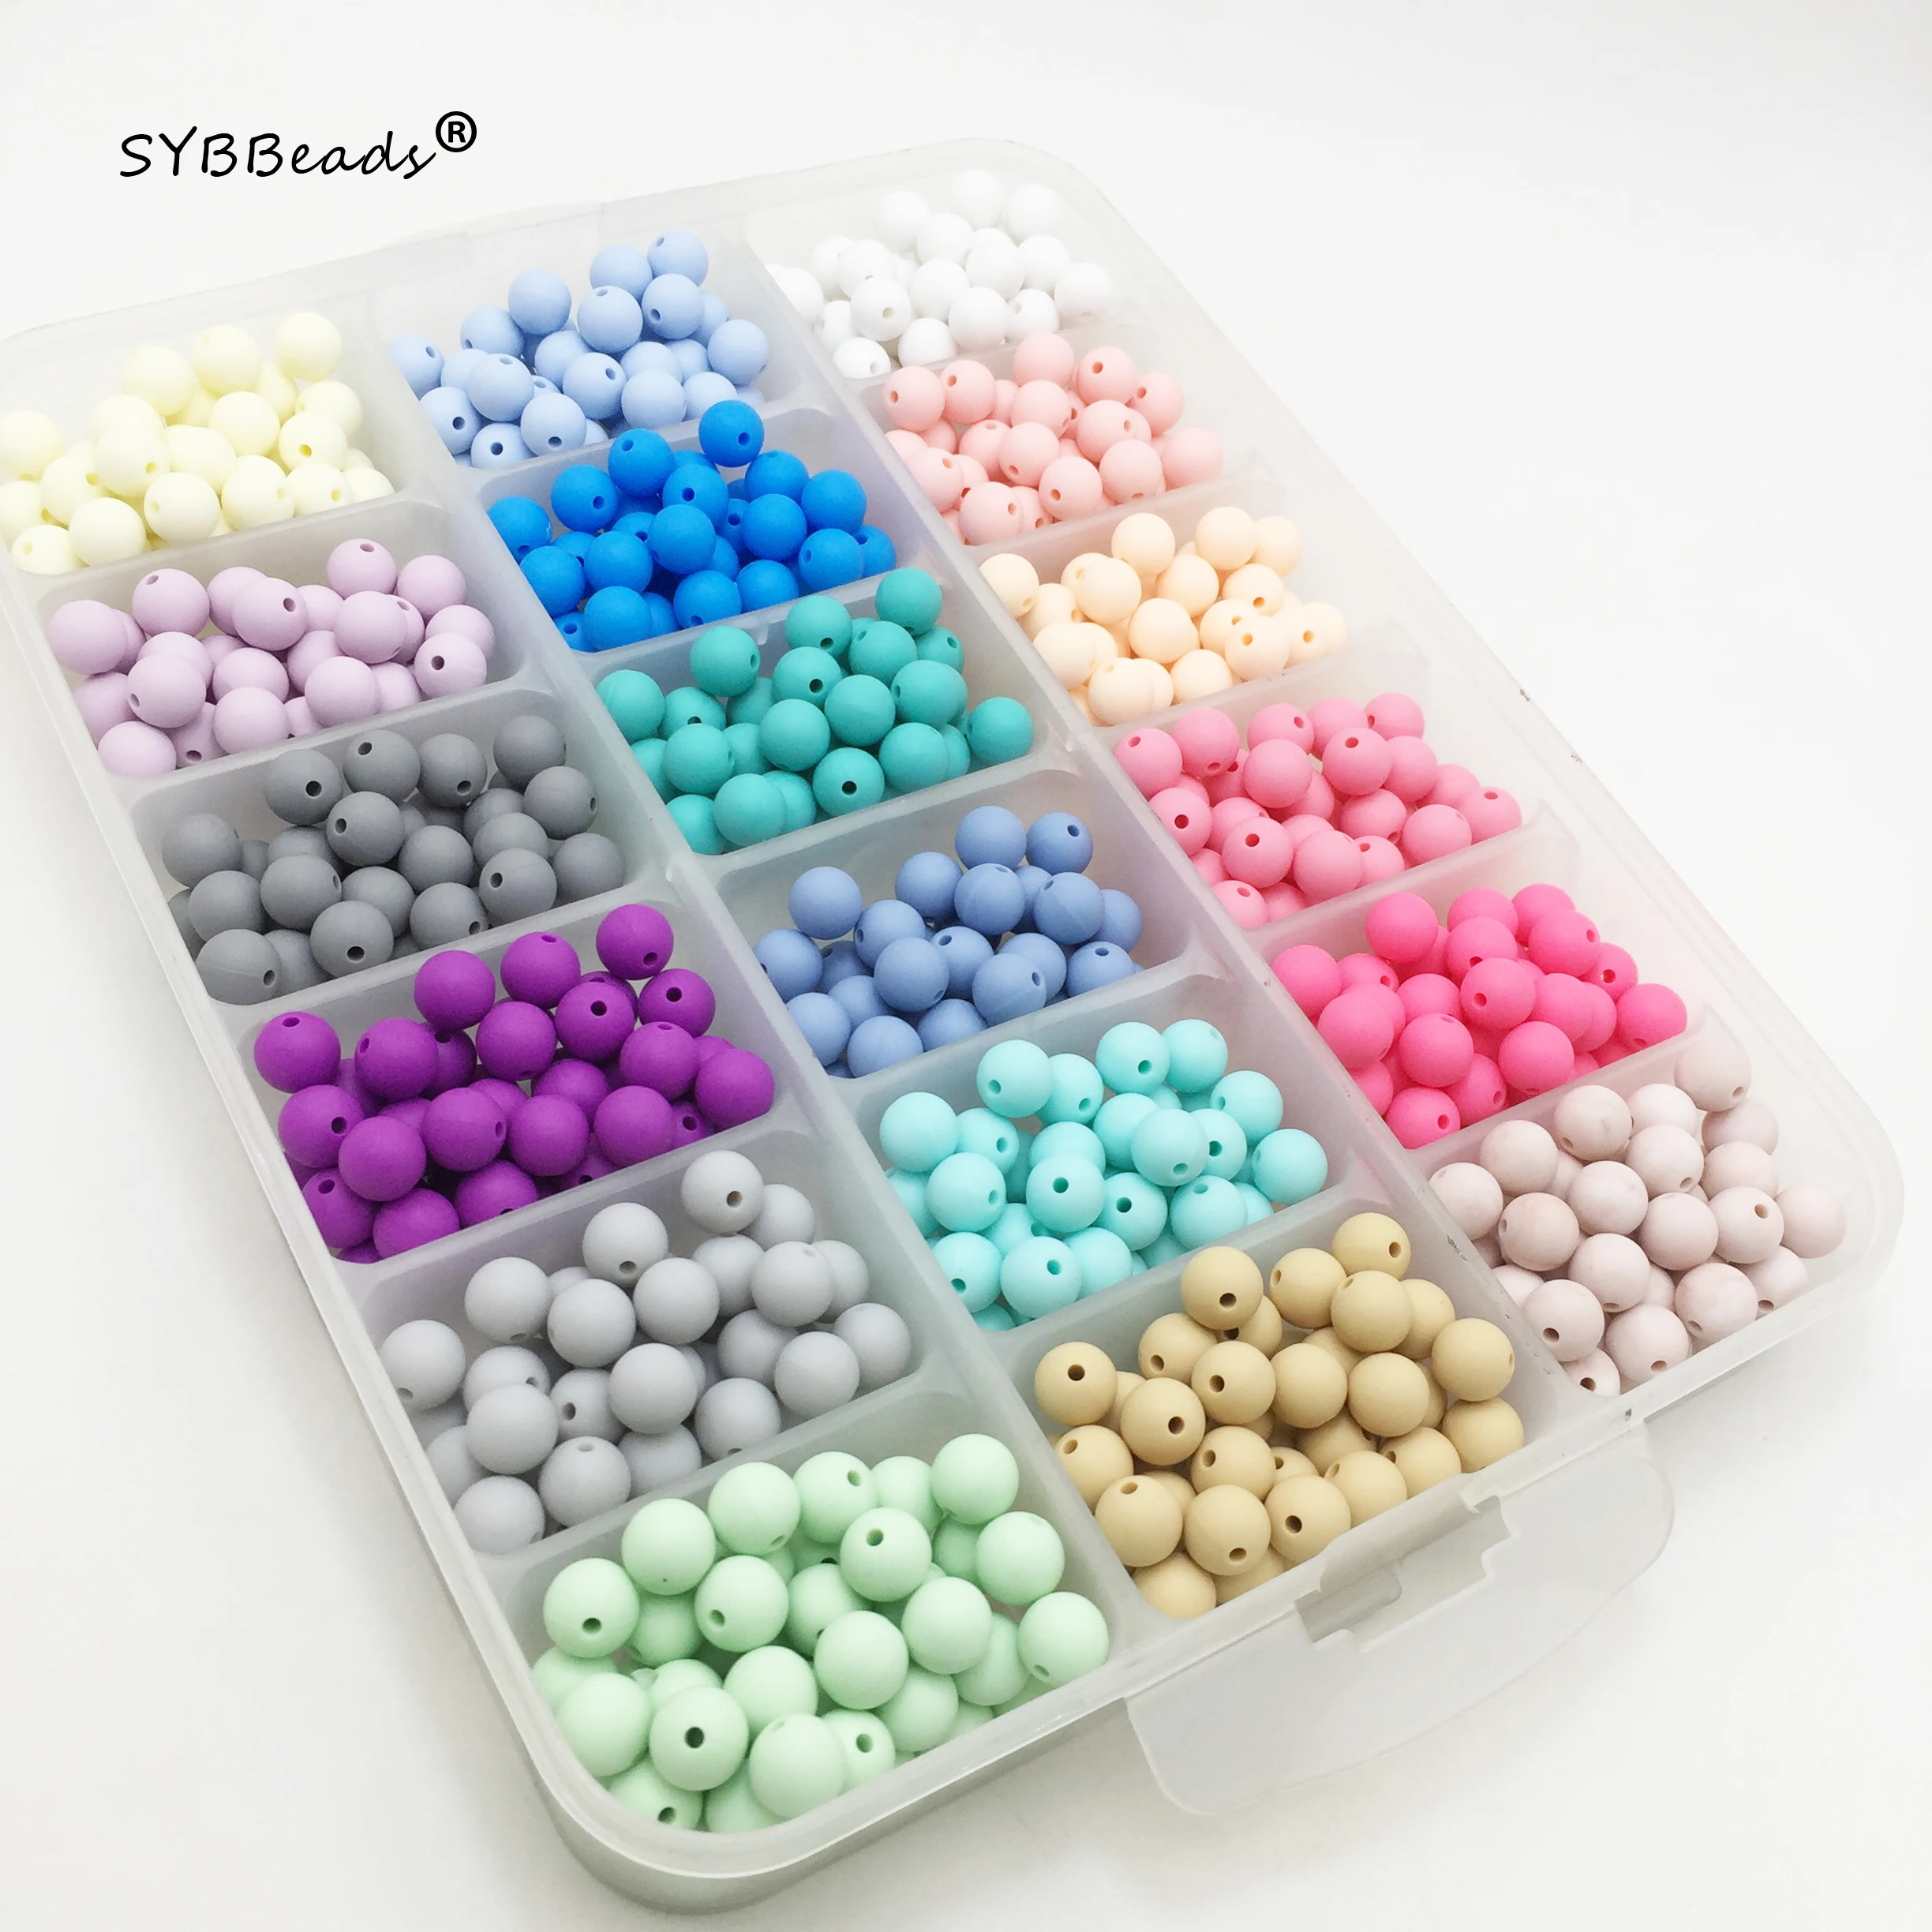 

Wholesale Bulk BPA Free Food Grade Baby Chew beads Soft Silicone Teething Beads For Jewelry Making